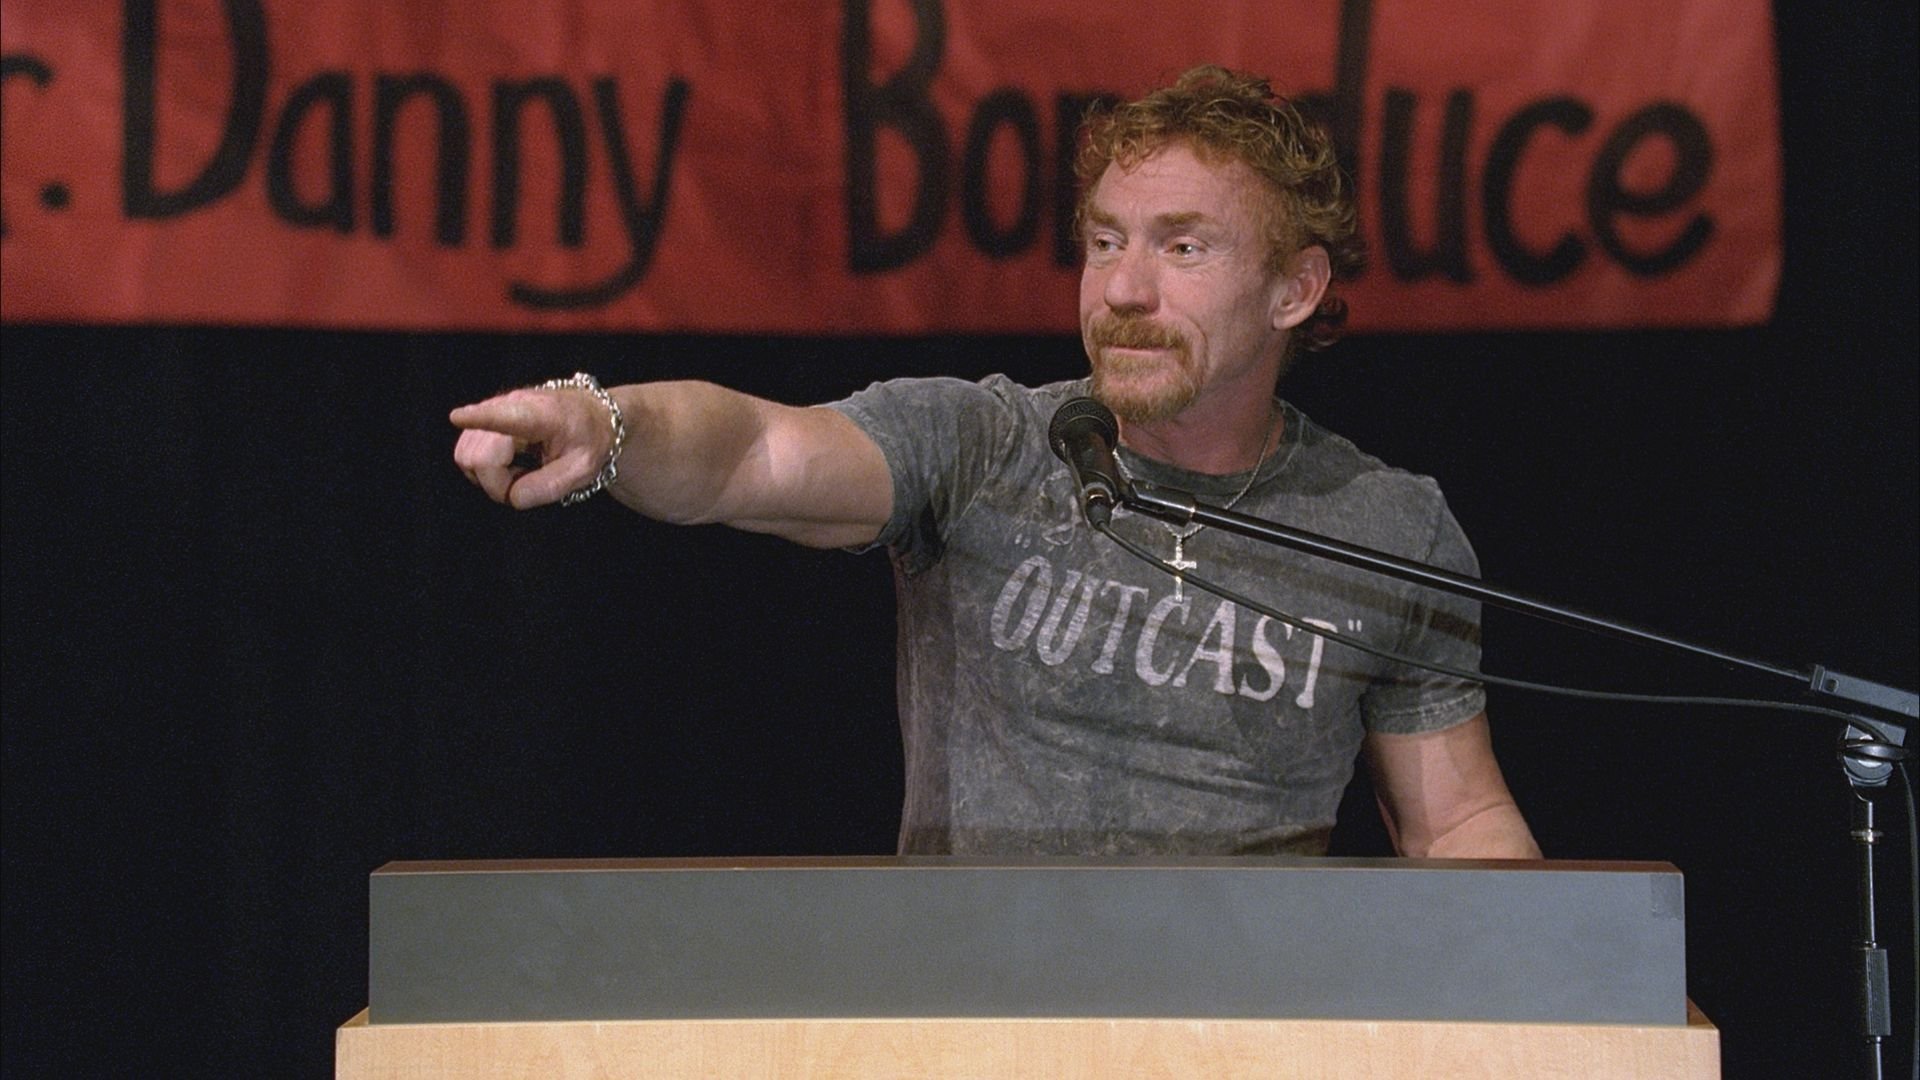 Danny Bonaduce is court ordered to speak to a group of students